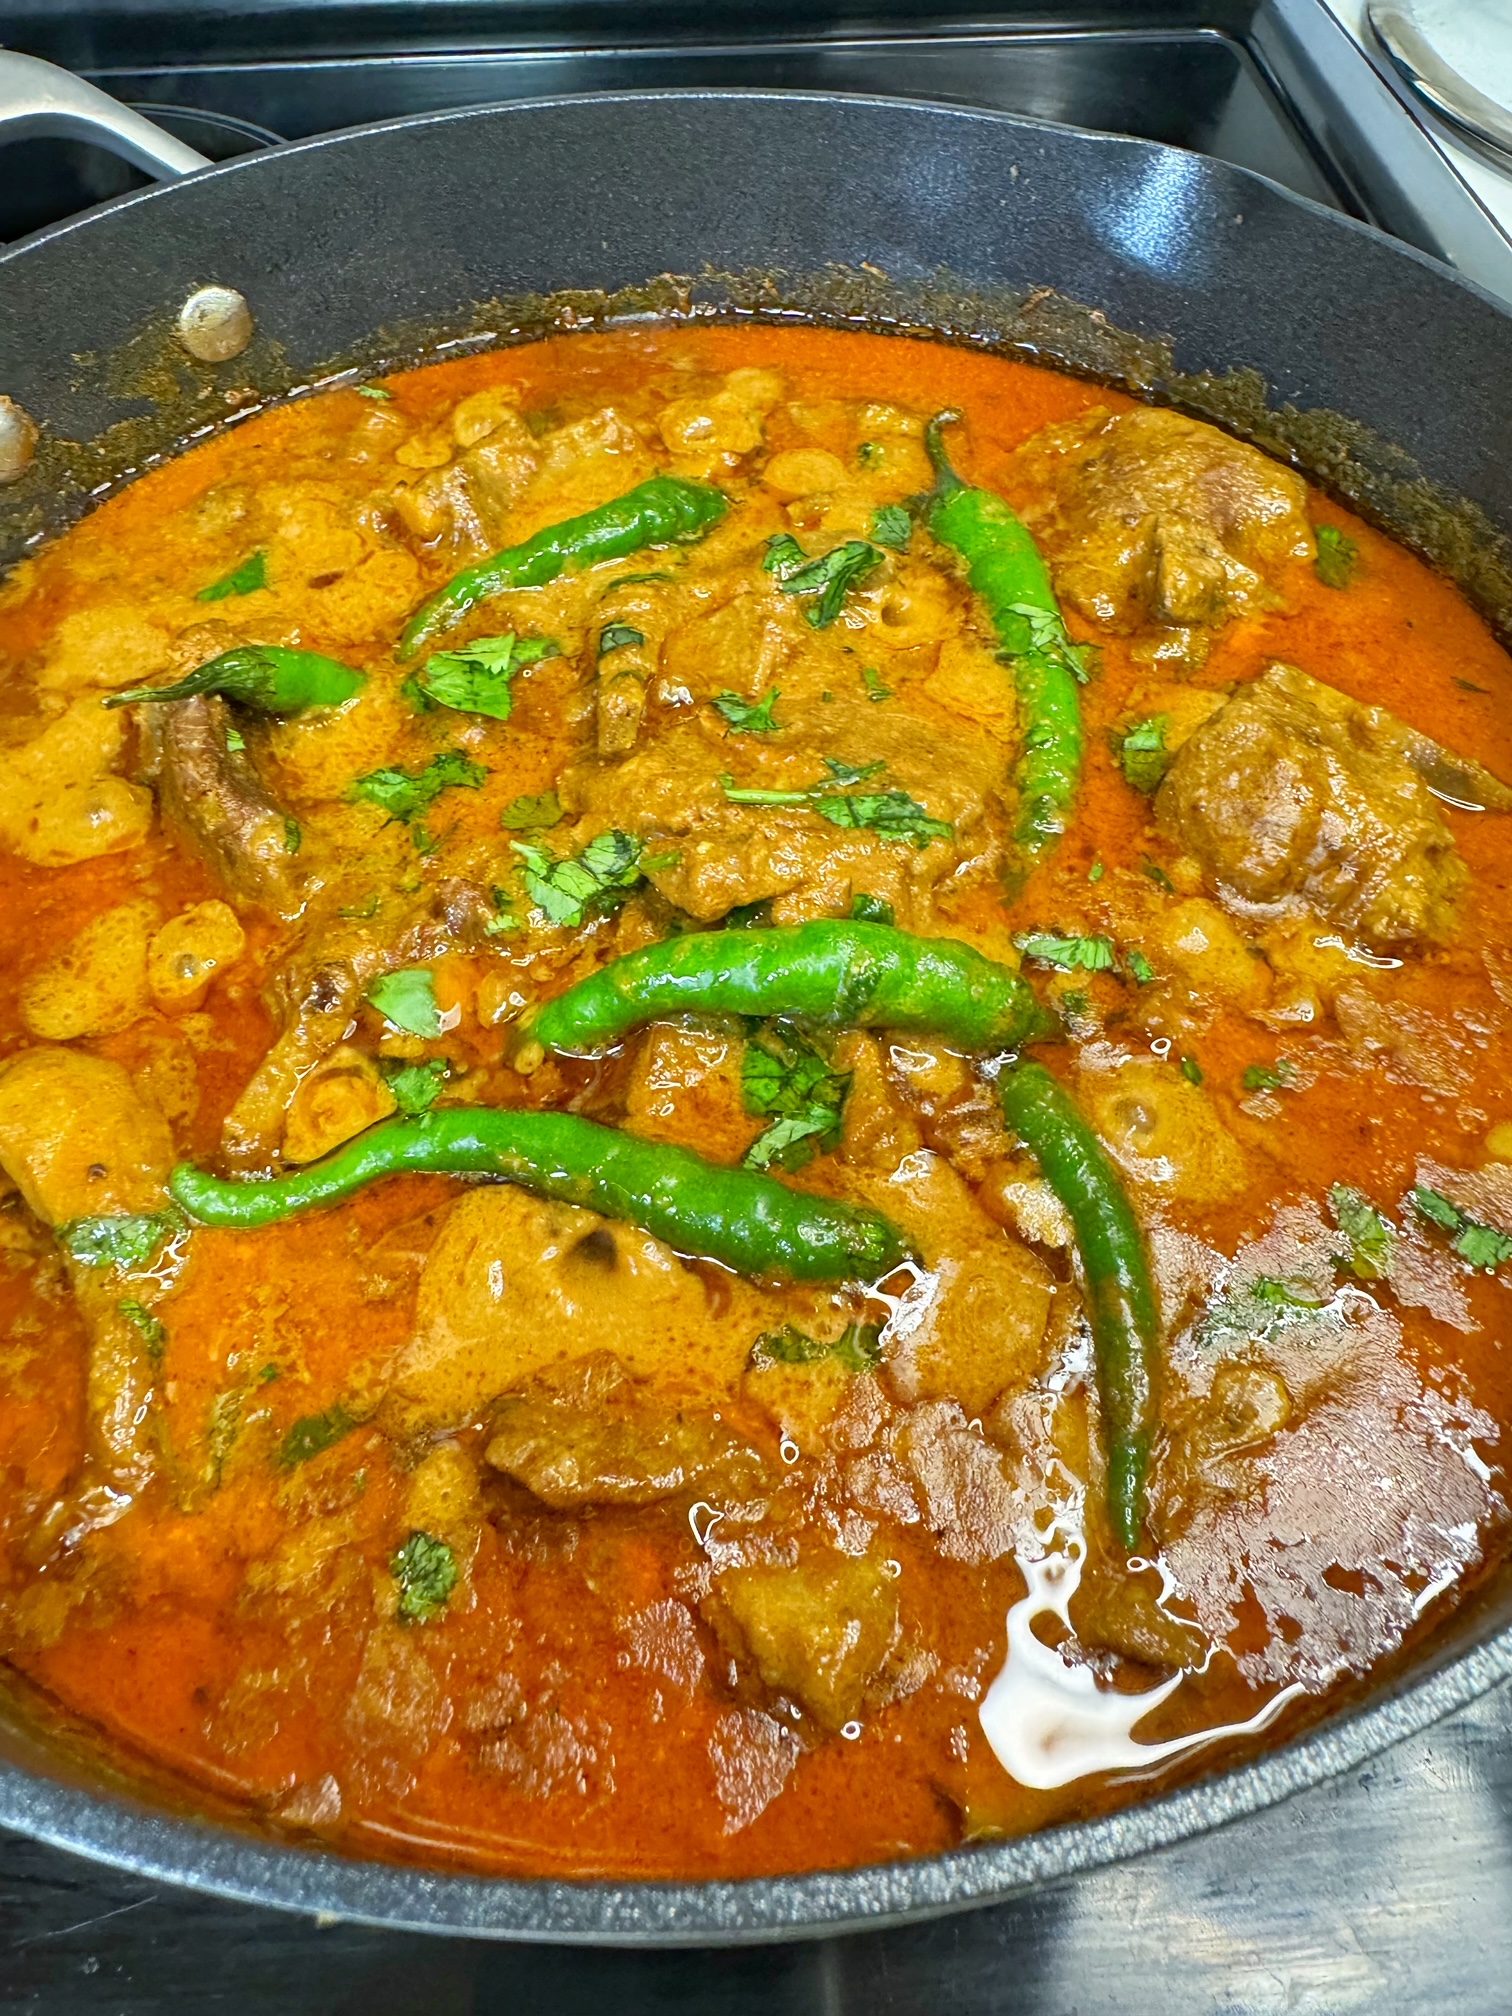 Mughlai Mutton Curry (Tender meat cooked with spices)